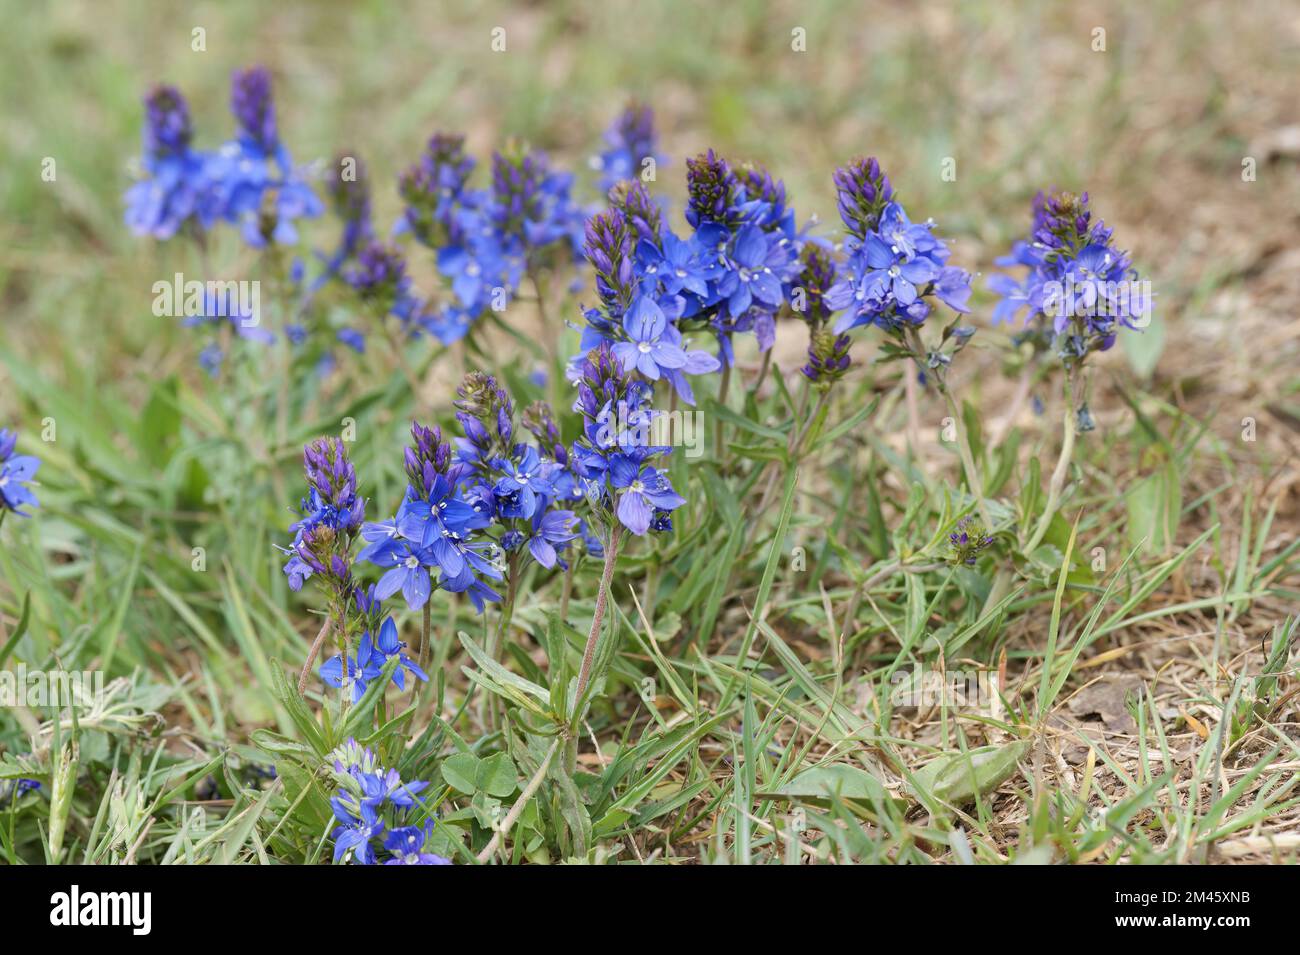 A closeup shot of the bright blue blossom of the rare speedwell Veronica prostrate in the field Stock Photo